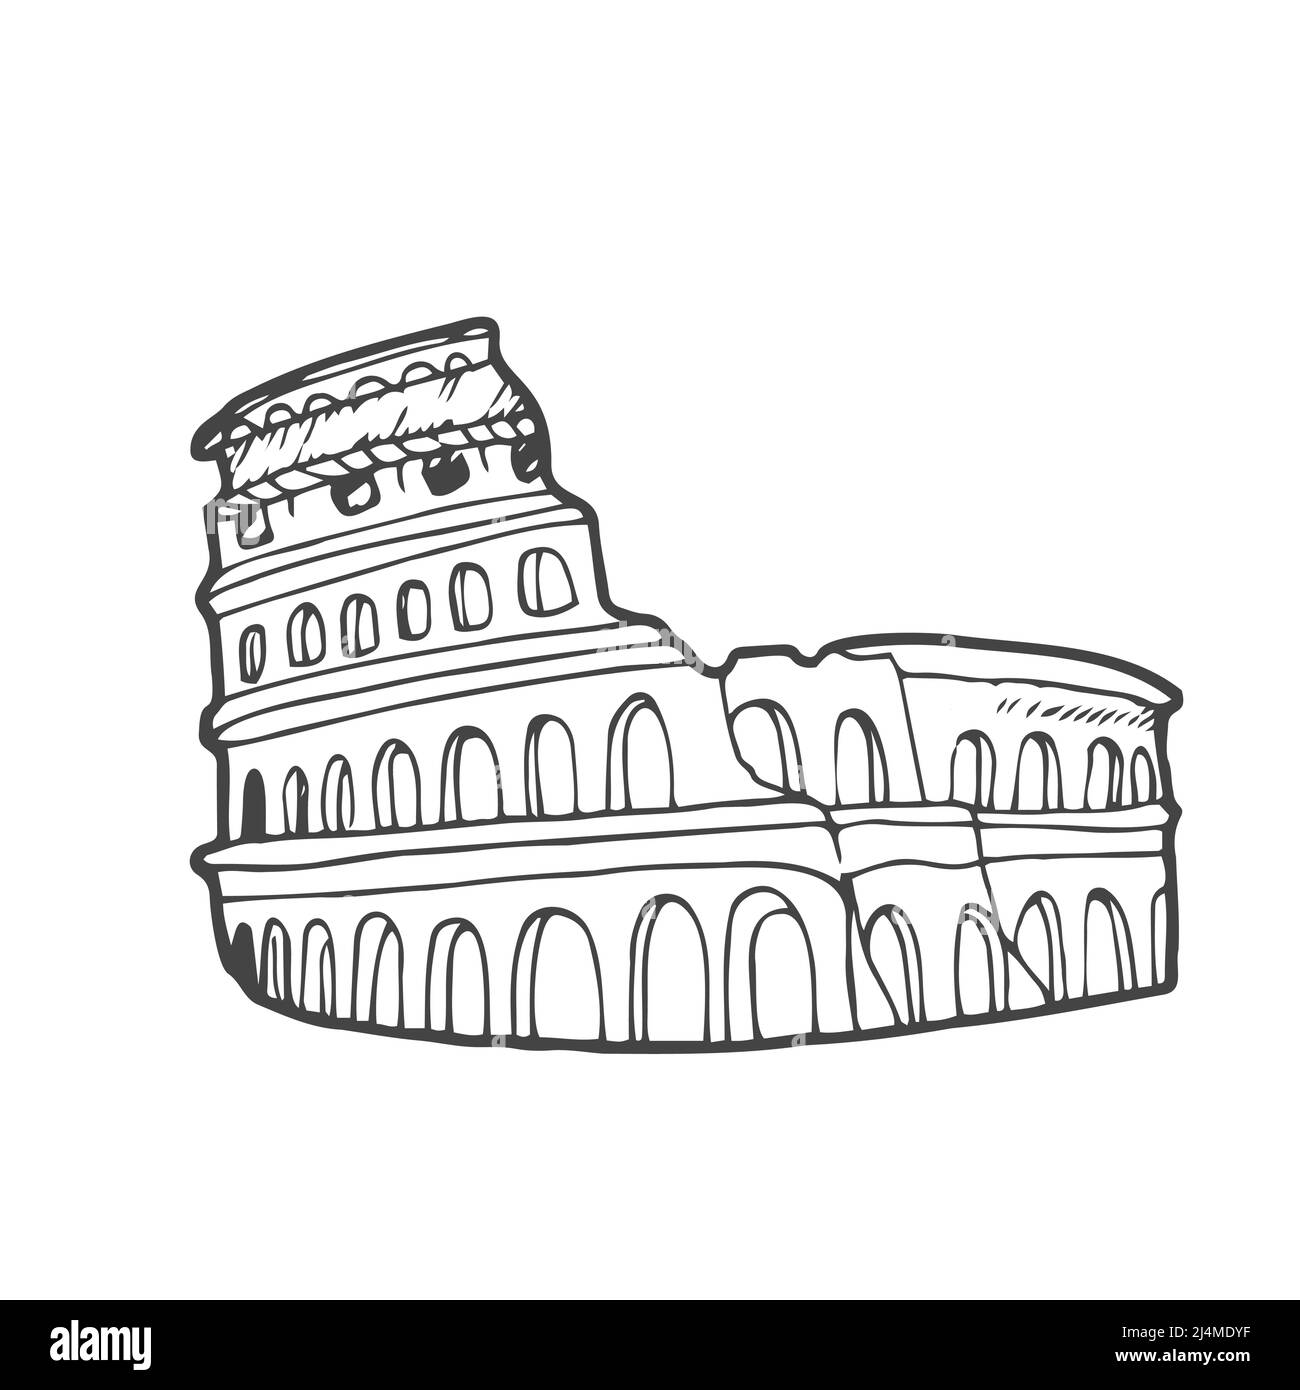 easy colosseum drawing